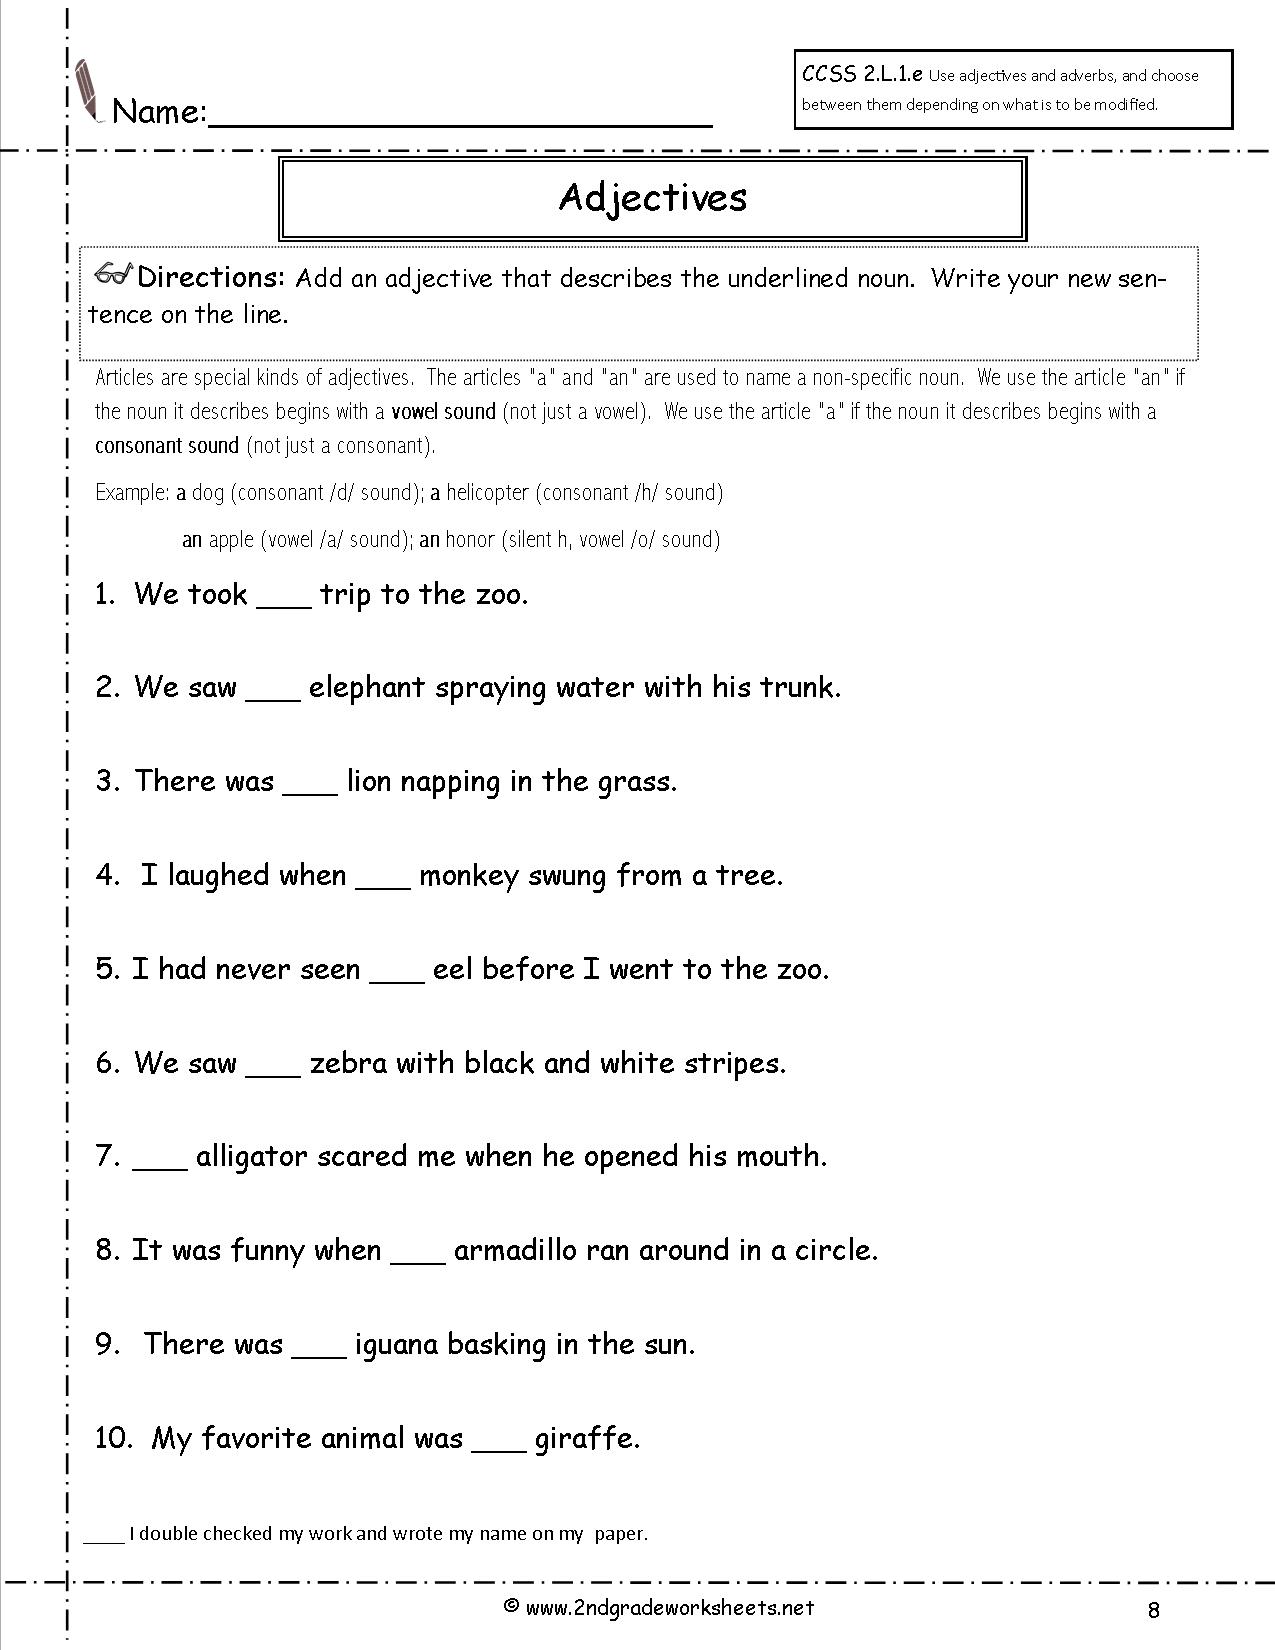 19 Best Images Of 2nd Grade English Worksheets Nouns Verbs Printable Verbs Worksheets 4th